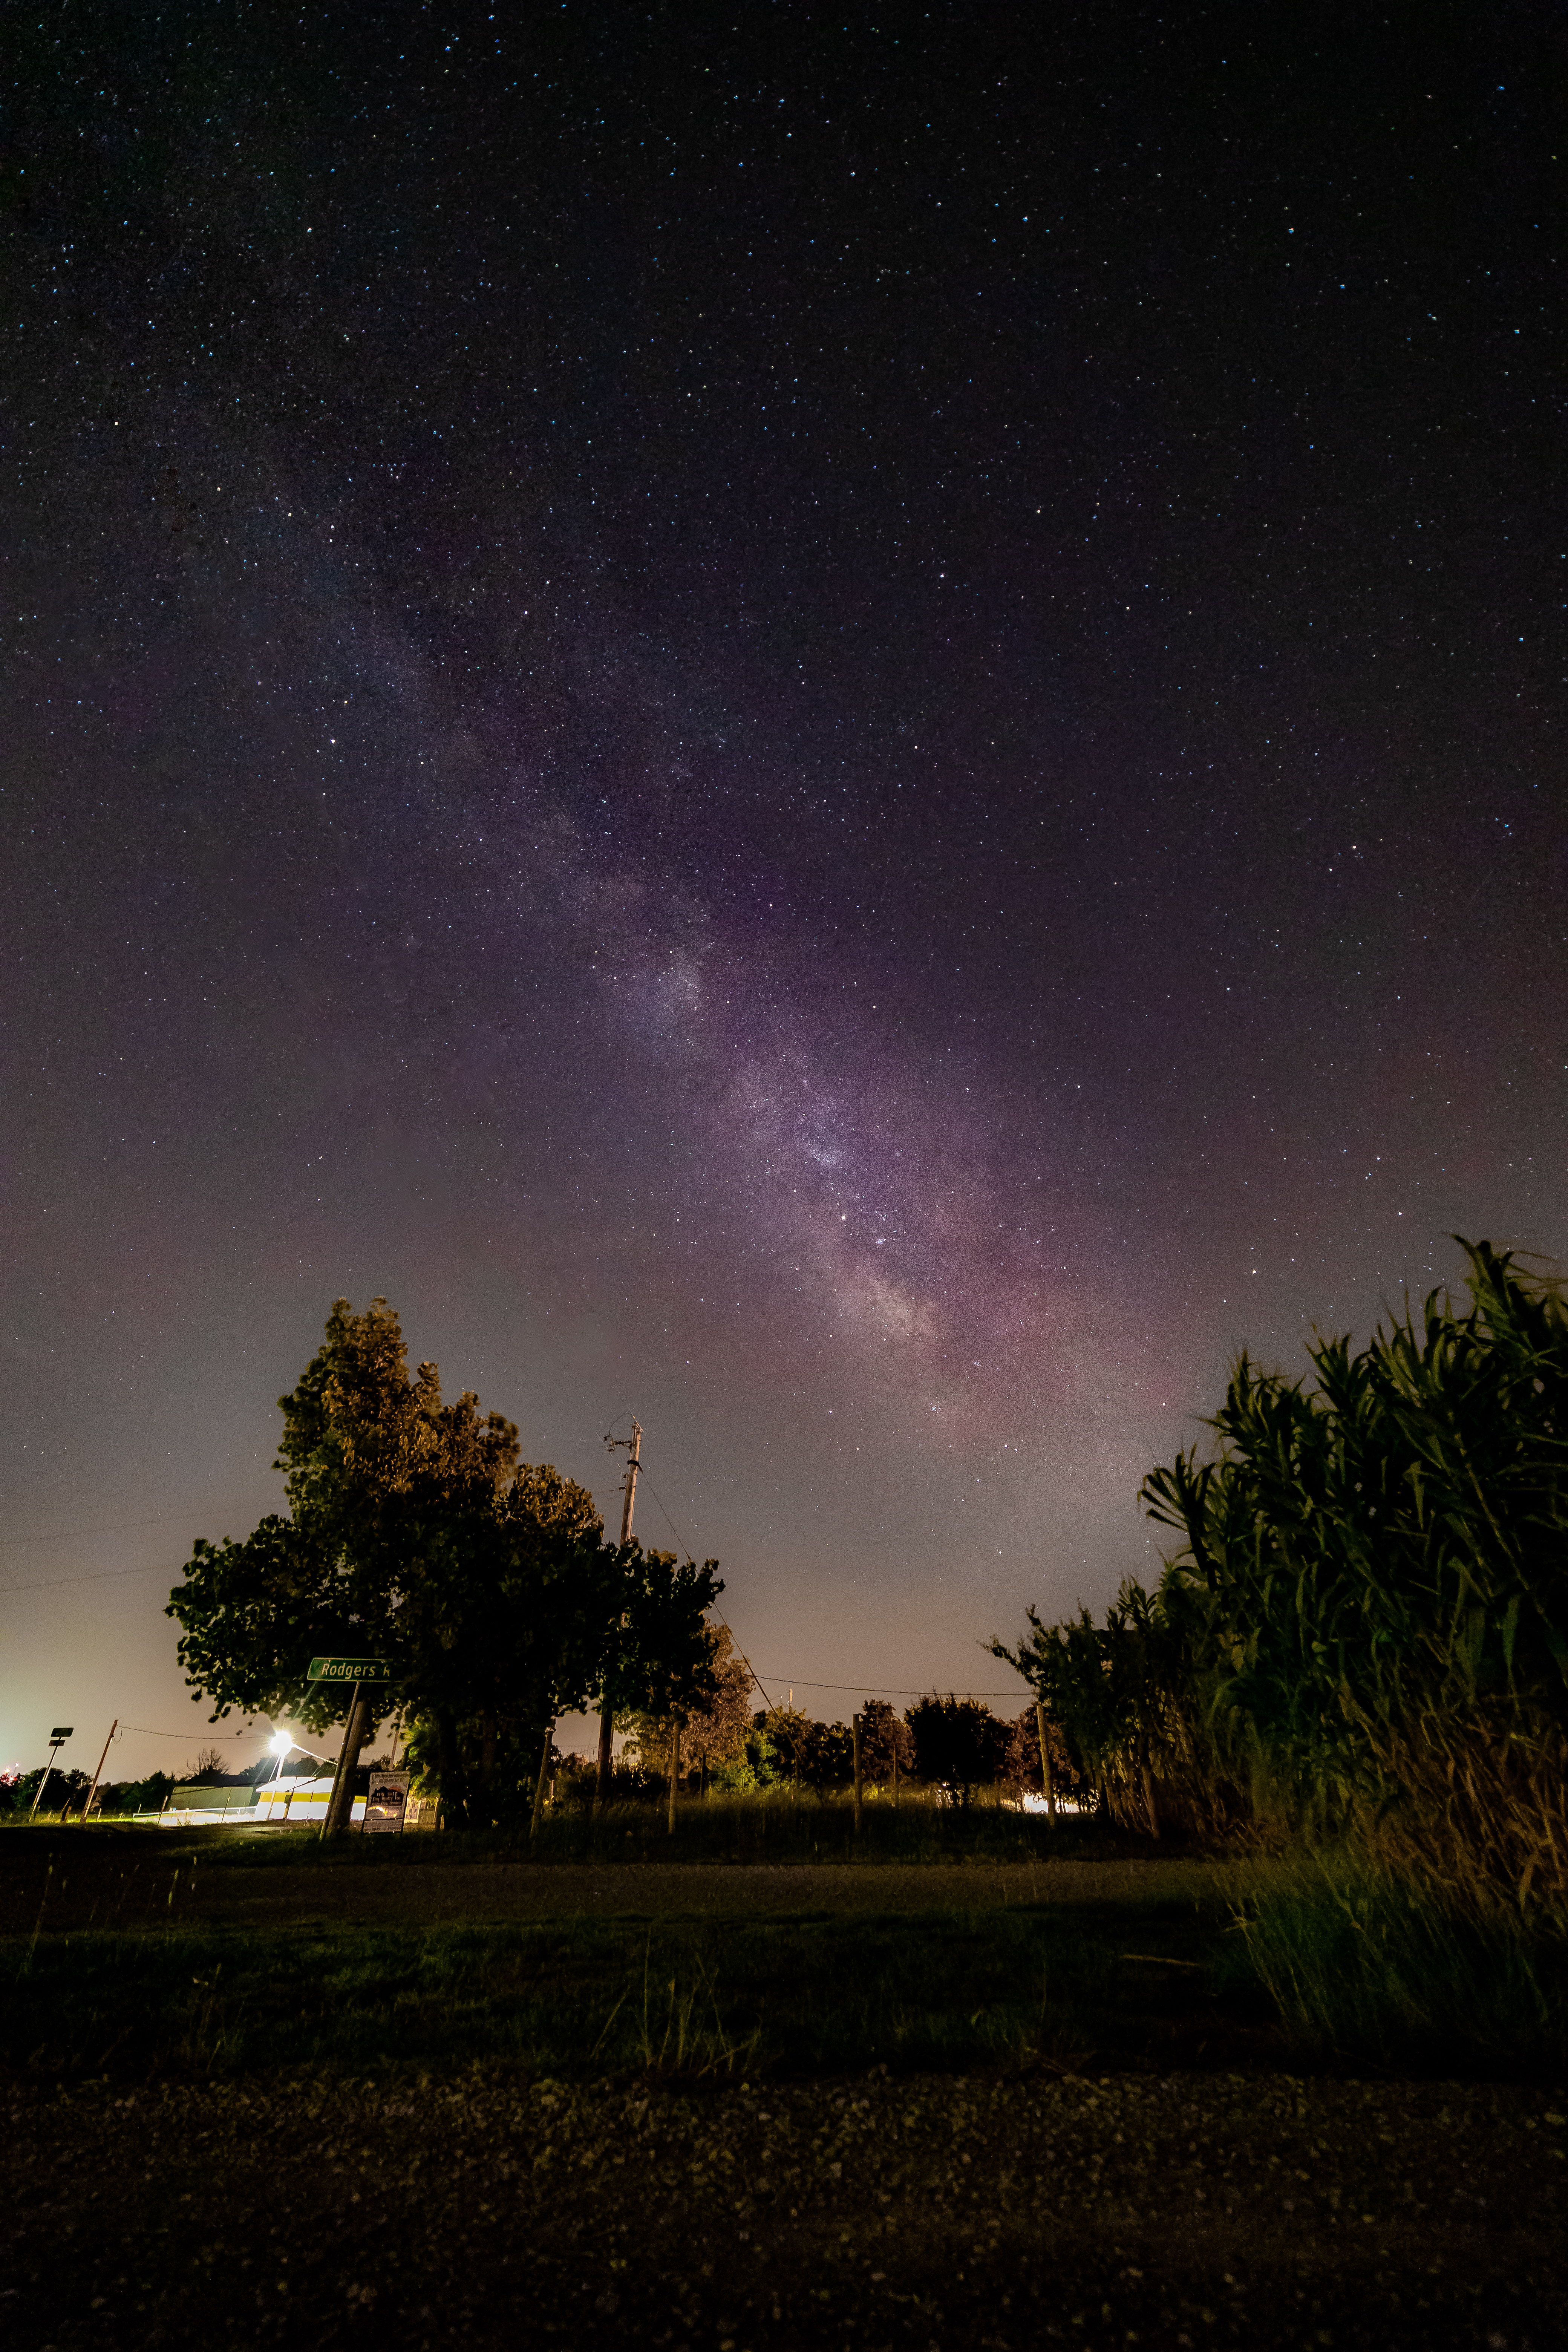 How to Shoot Great Astrophotography Without Photoshop